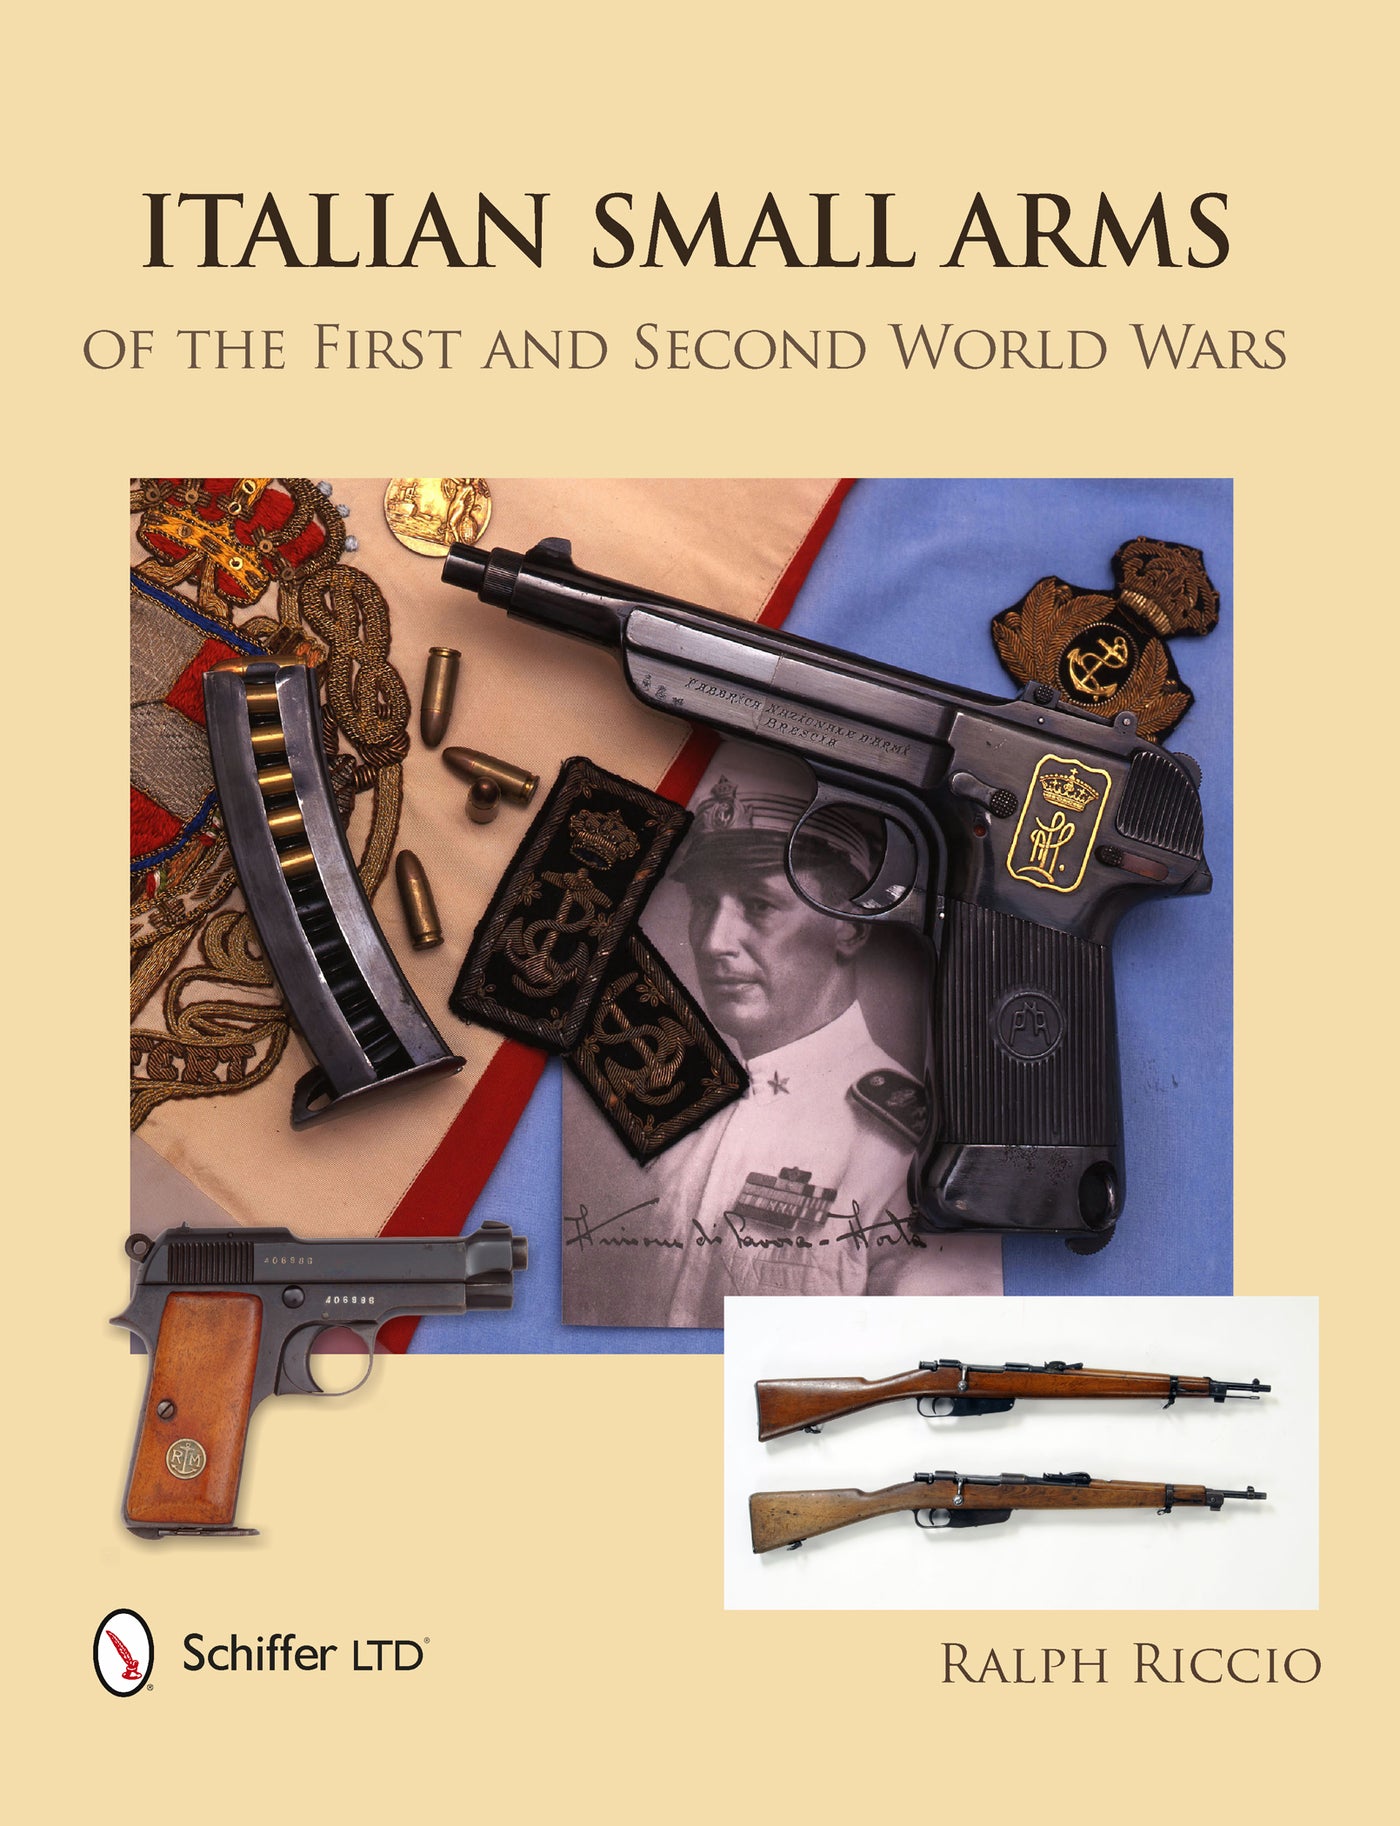 Italian Small Arms of the First and Second World Wars